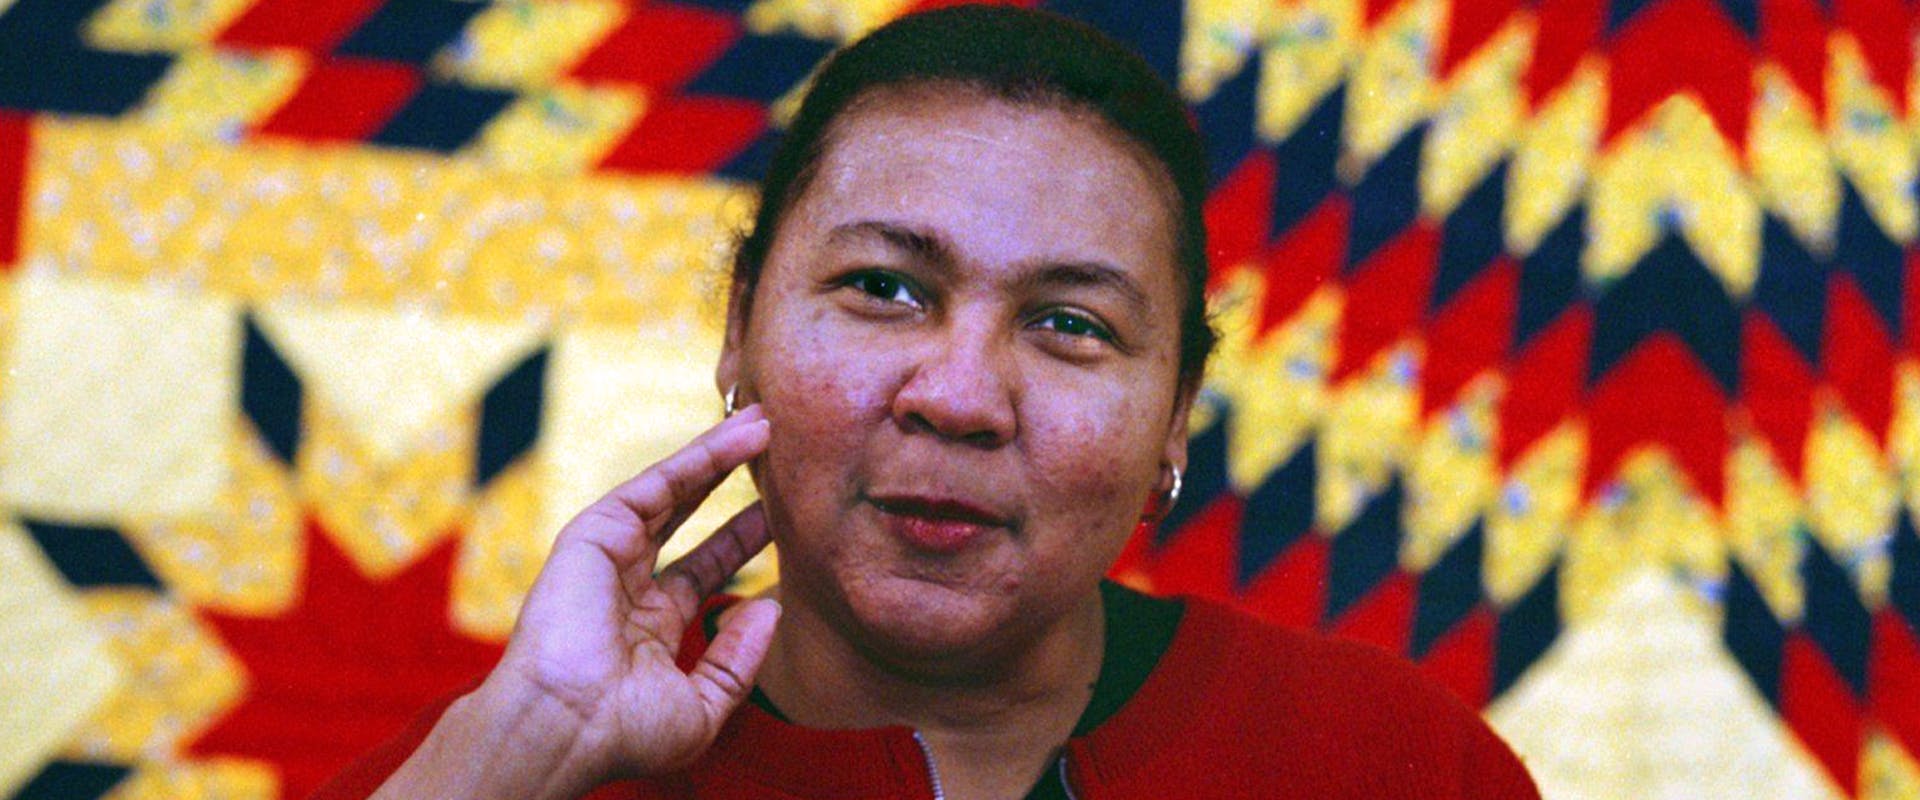 !999) Black feminist Bell Hooks during interview for her new book. Said the feminist writer who argues against all racial, class or gender stereotyping, 'Don't take my picture so close up. That's what White photographers do.' 